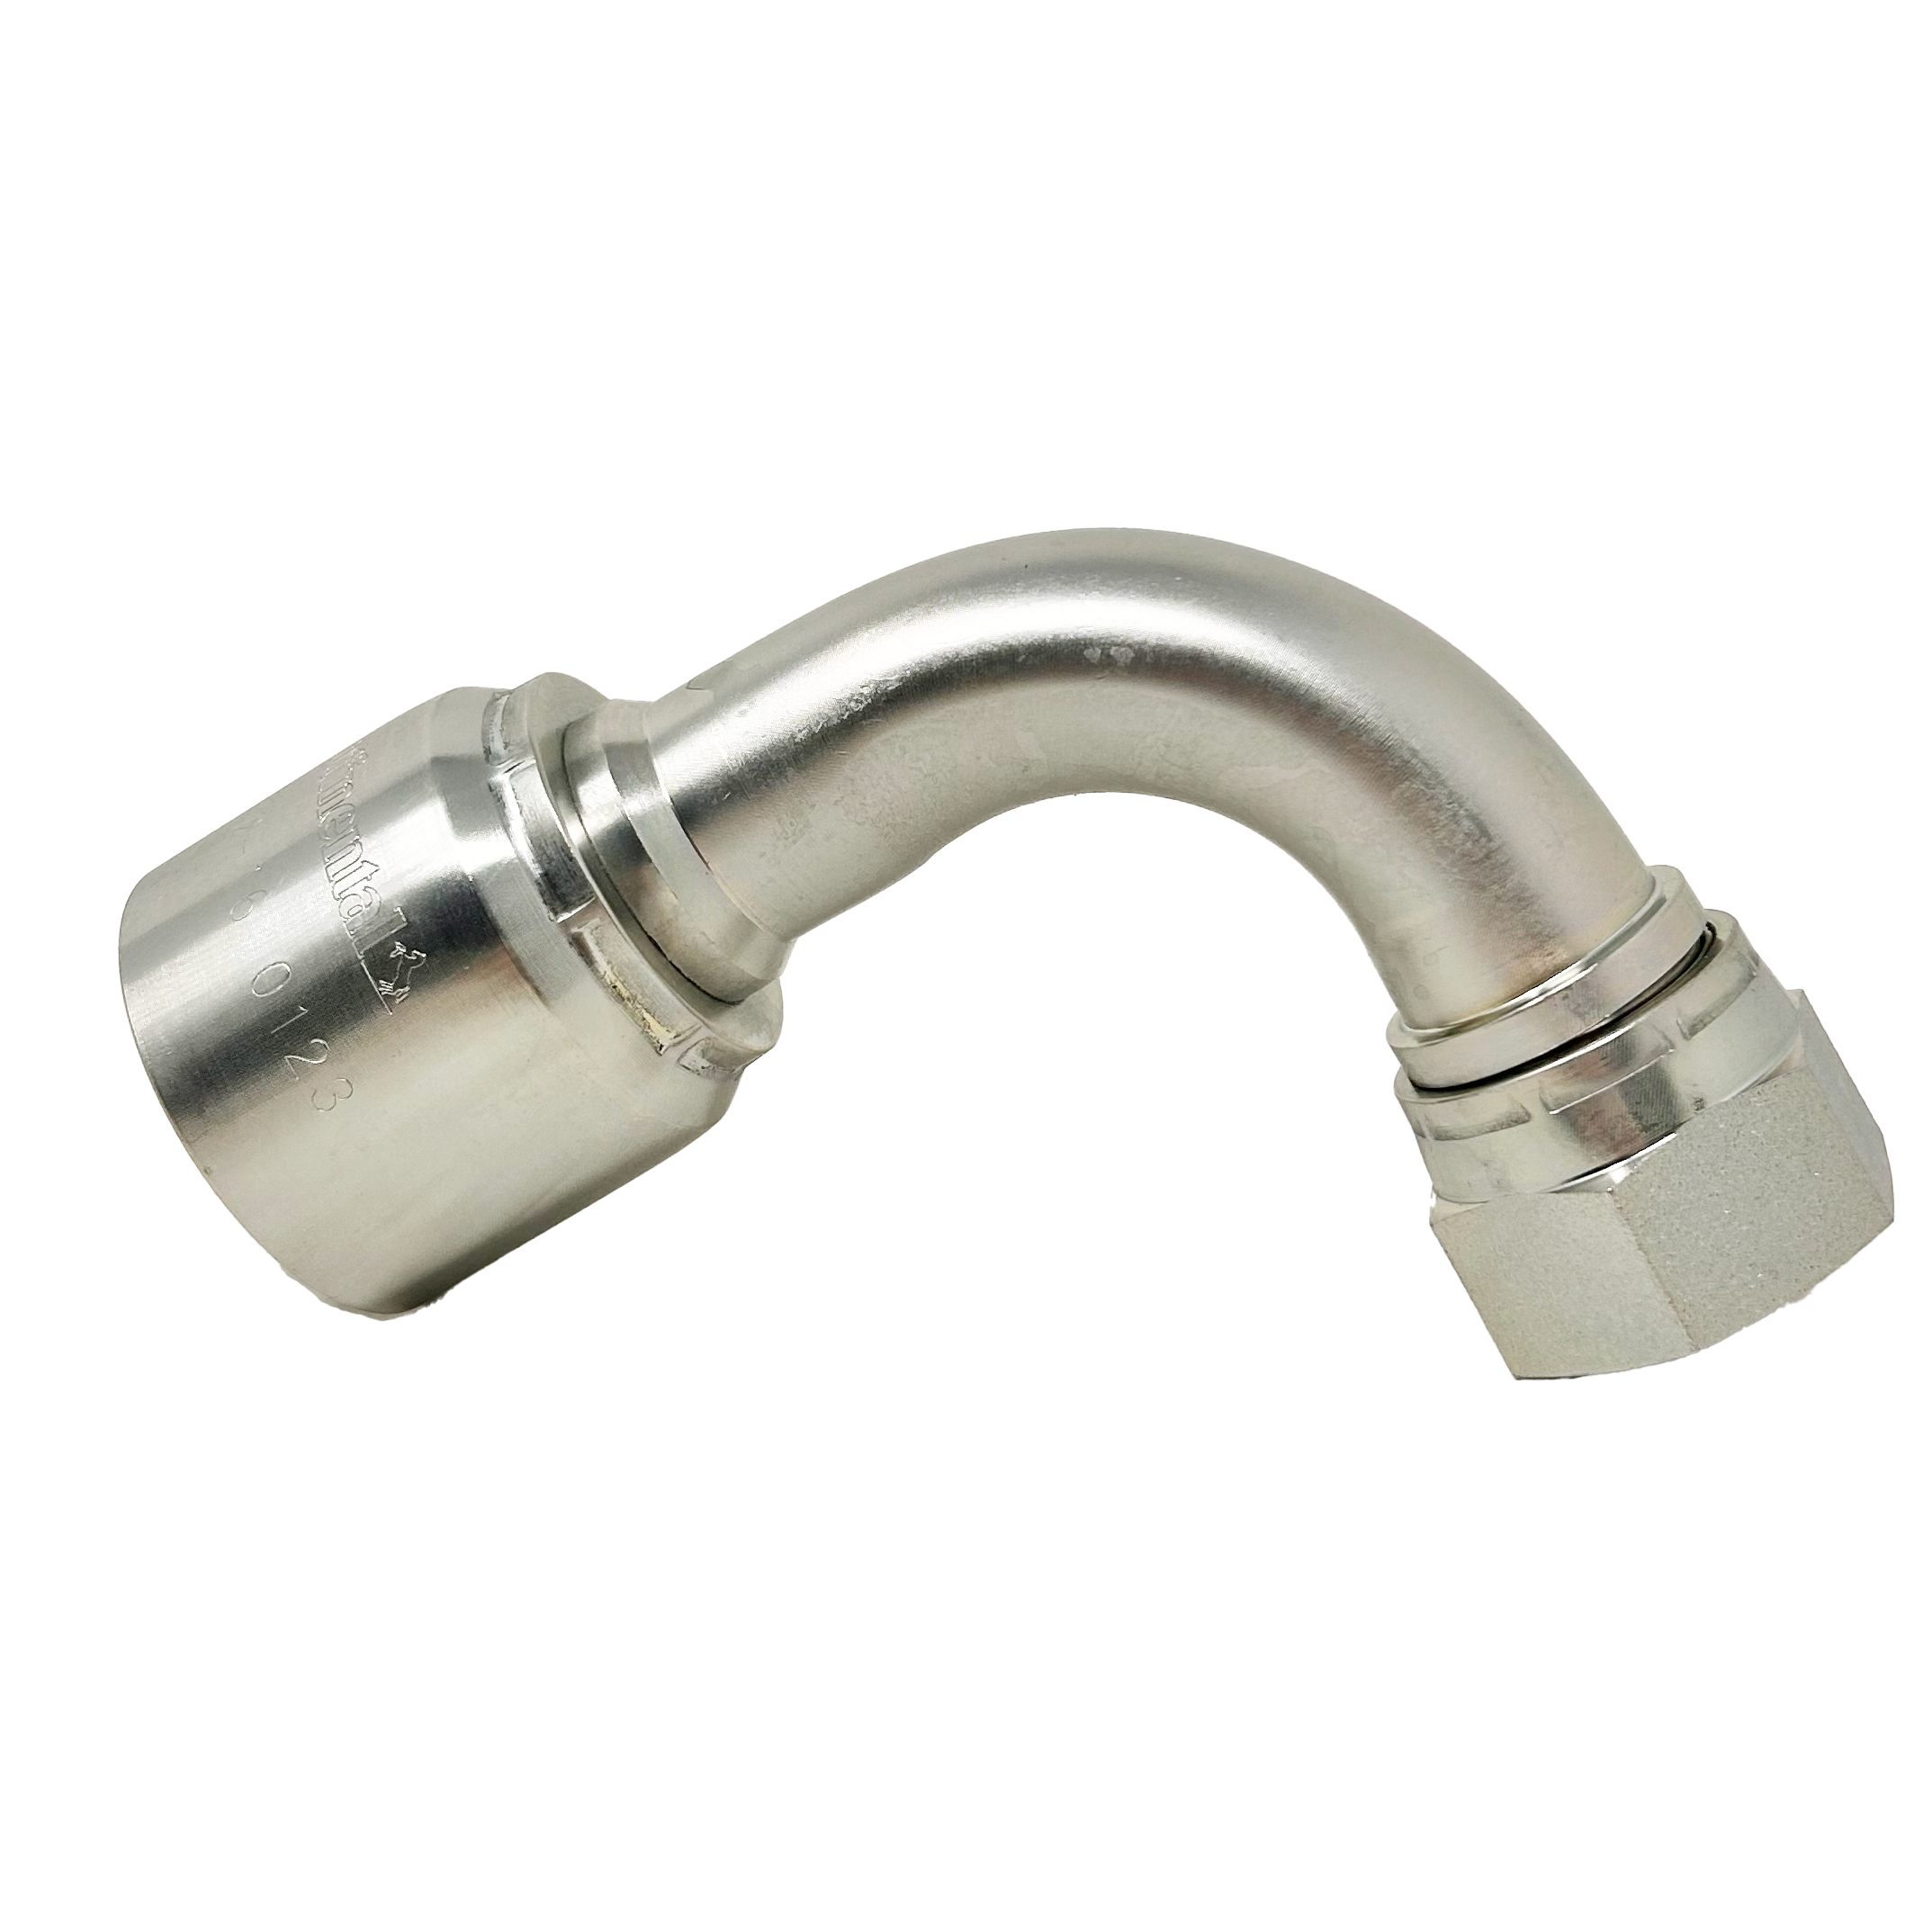 B2-JCFX90-1212: Continental Hose Fitting, 0.75 (3/4") Hose ID x 1-1/16-12 Female JIC, 90-Degree Swivel Connection